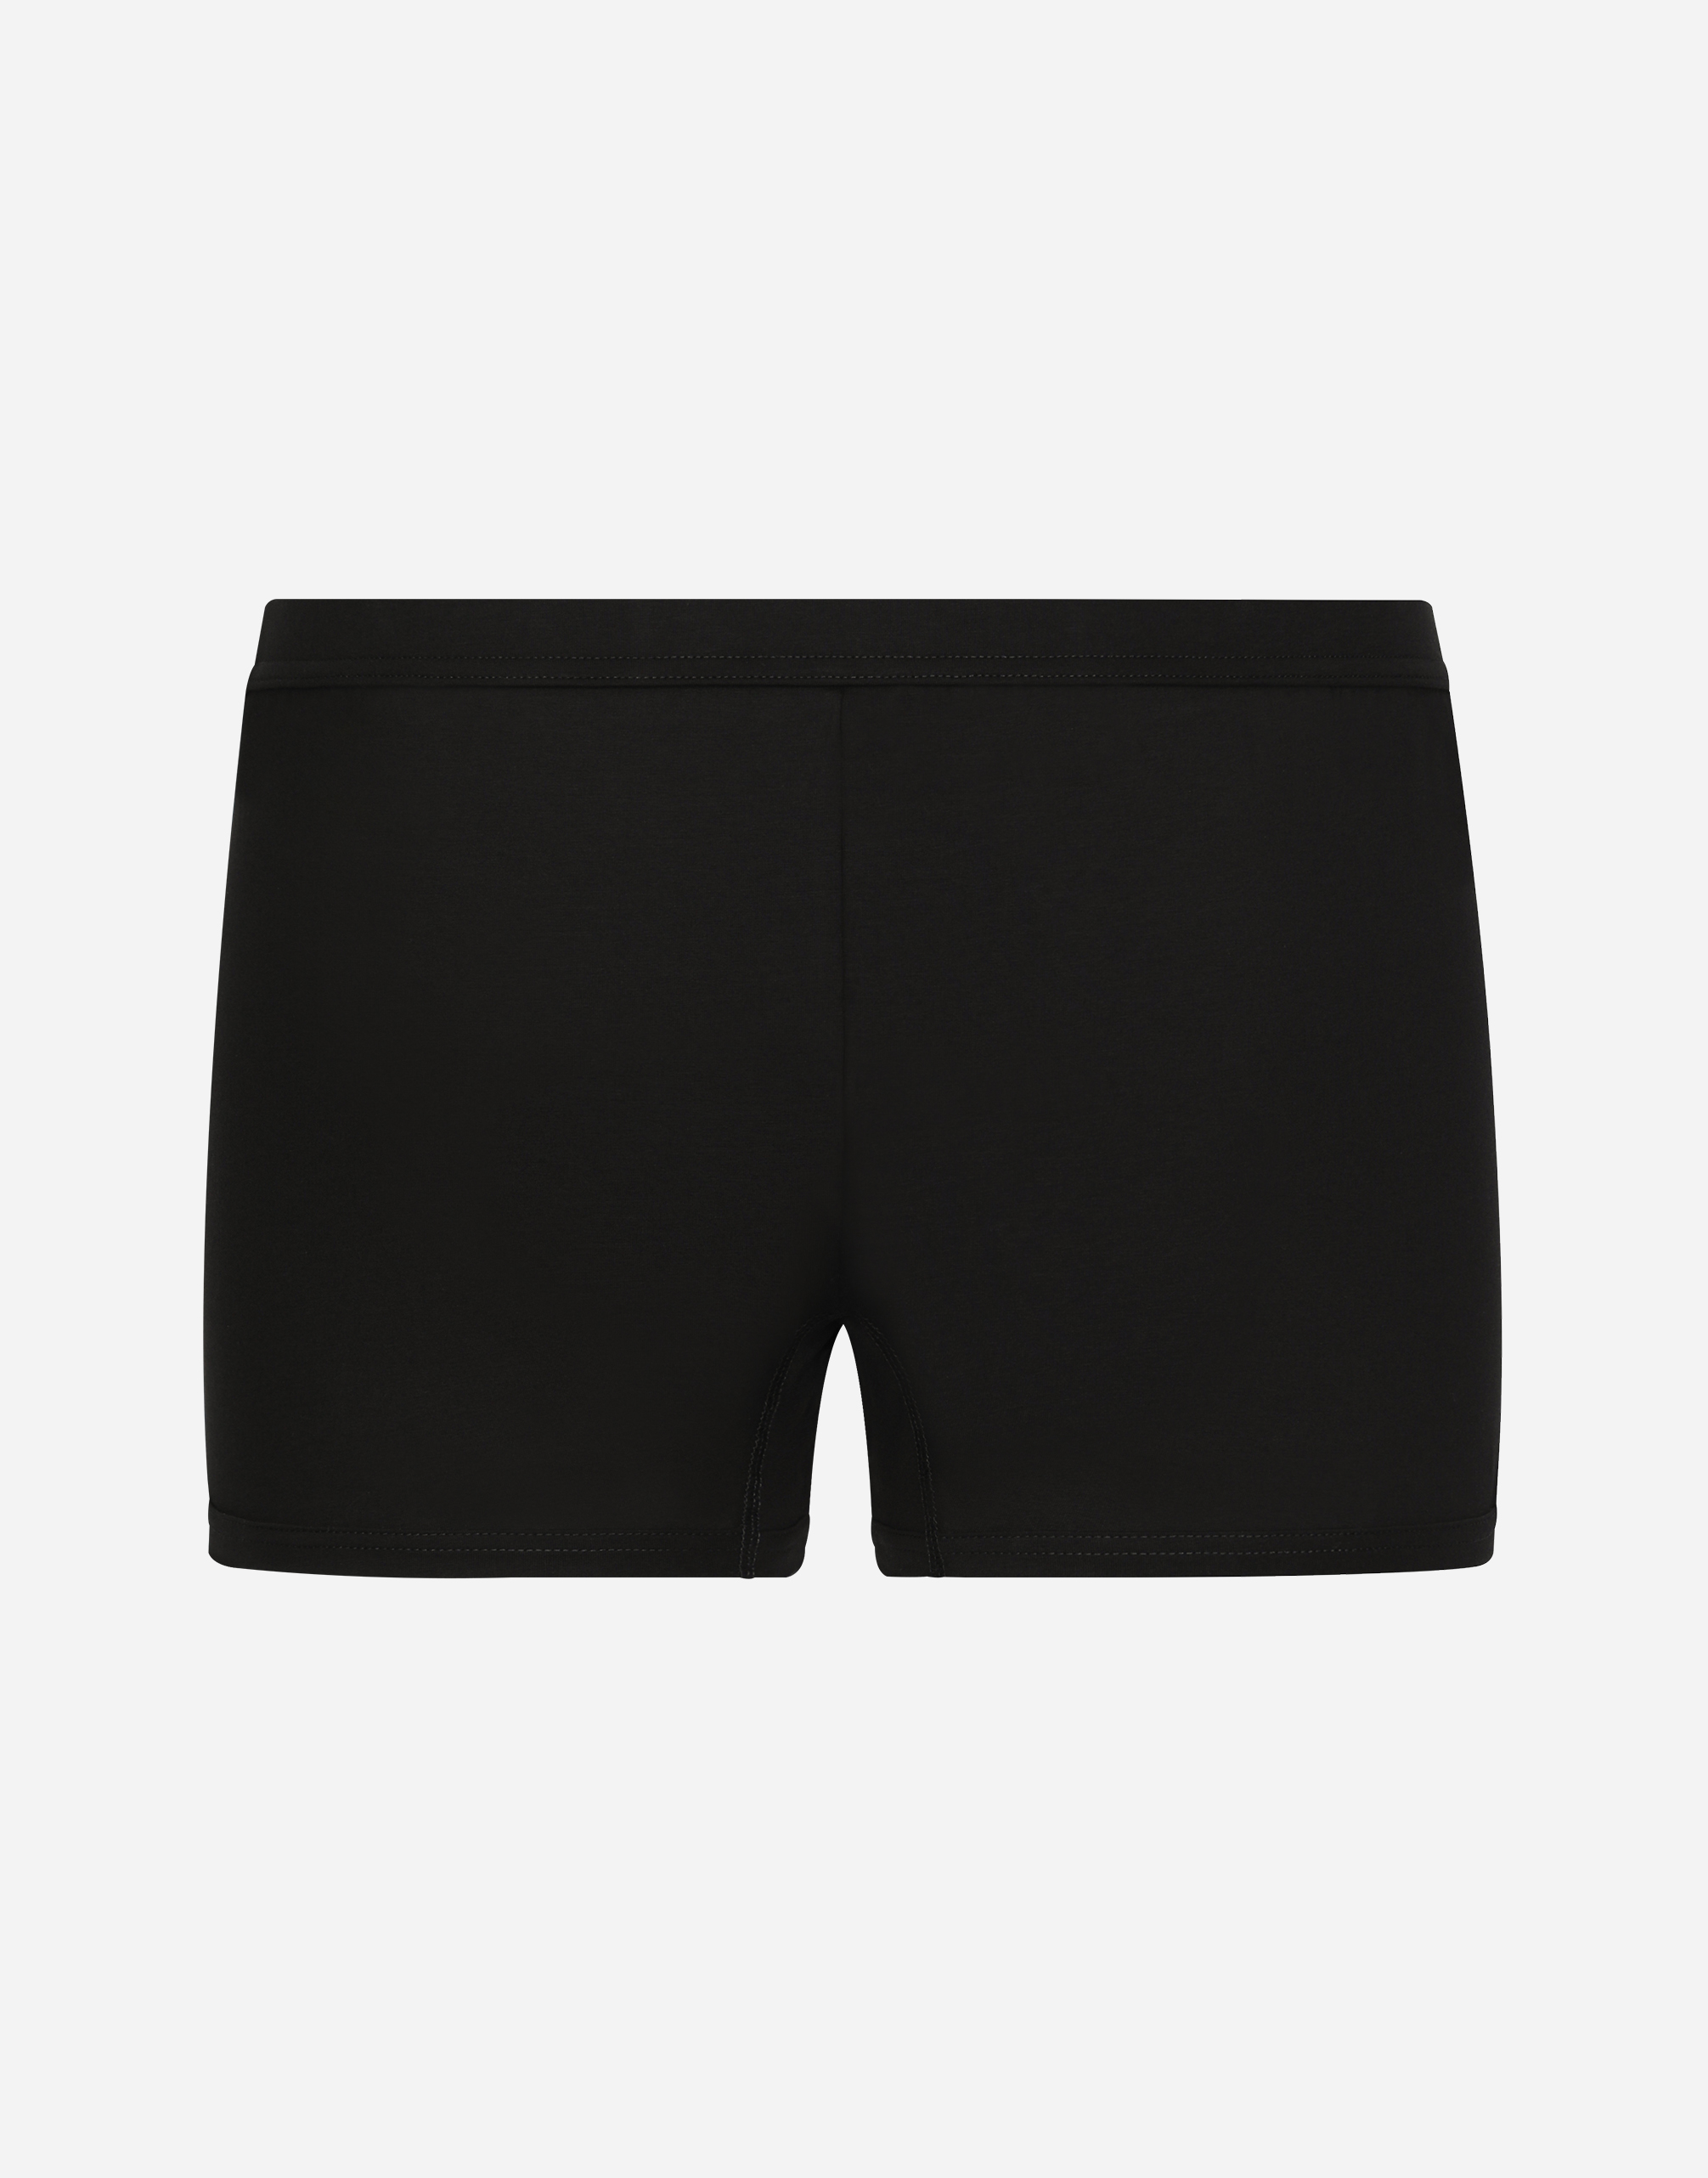 Two-way stretch jersey boxers with logo label in Black for Men